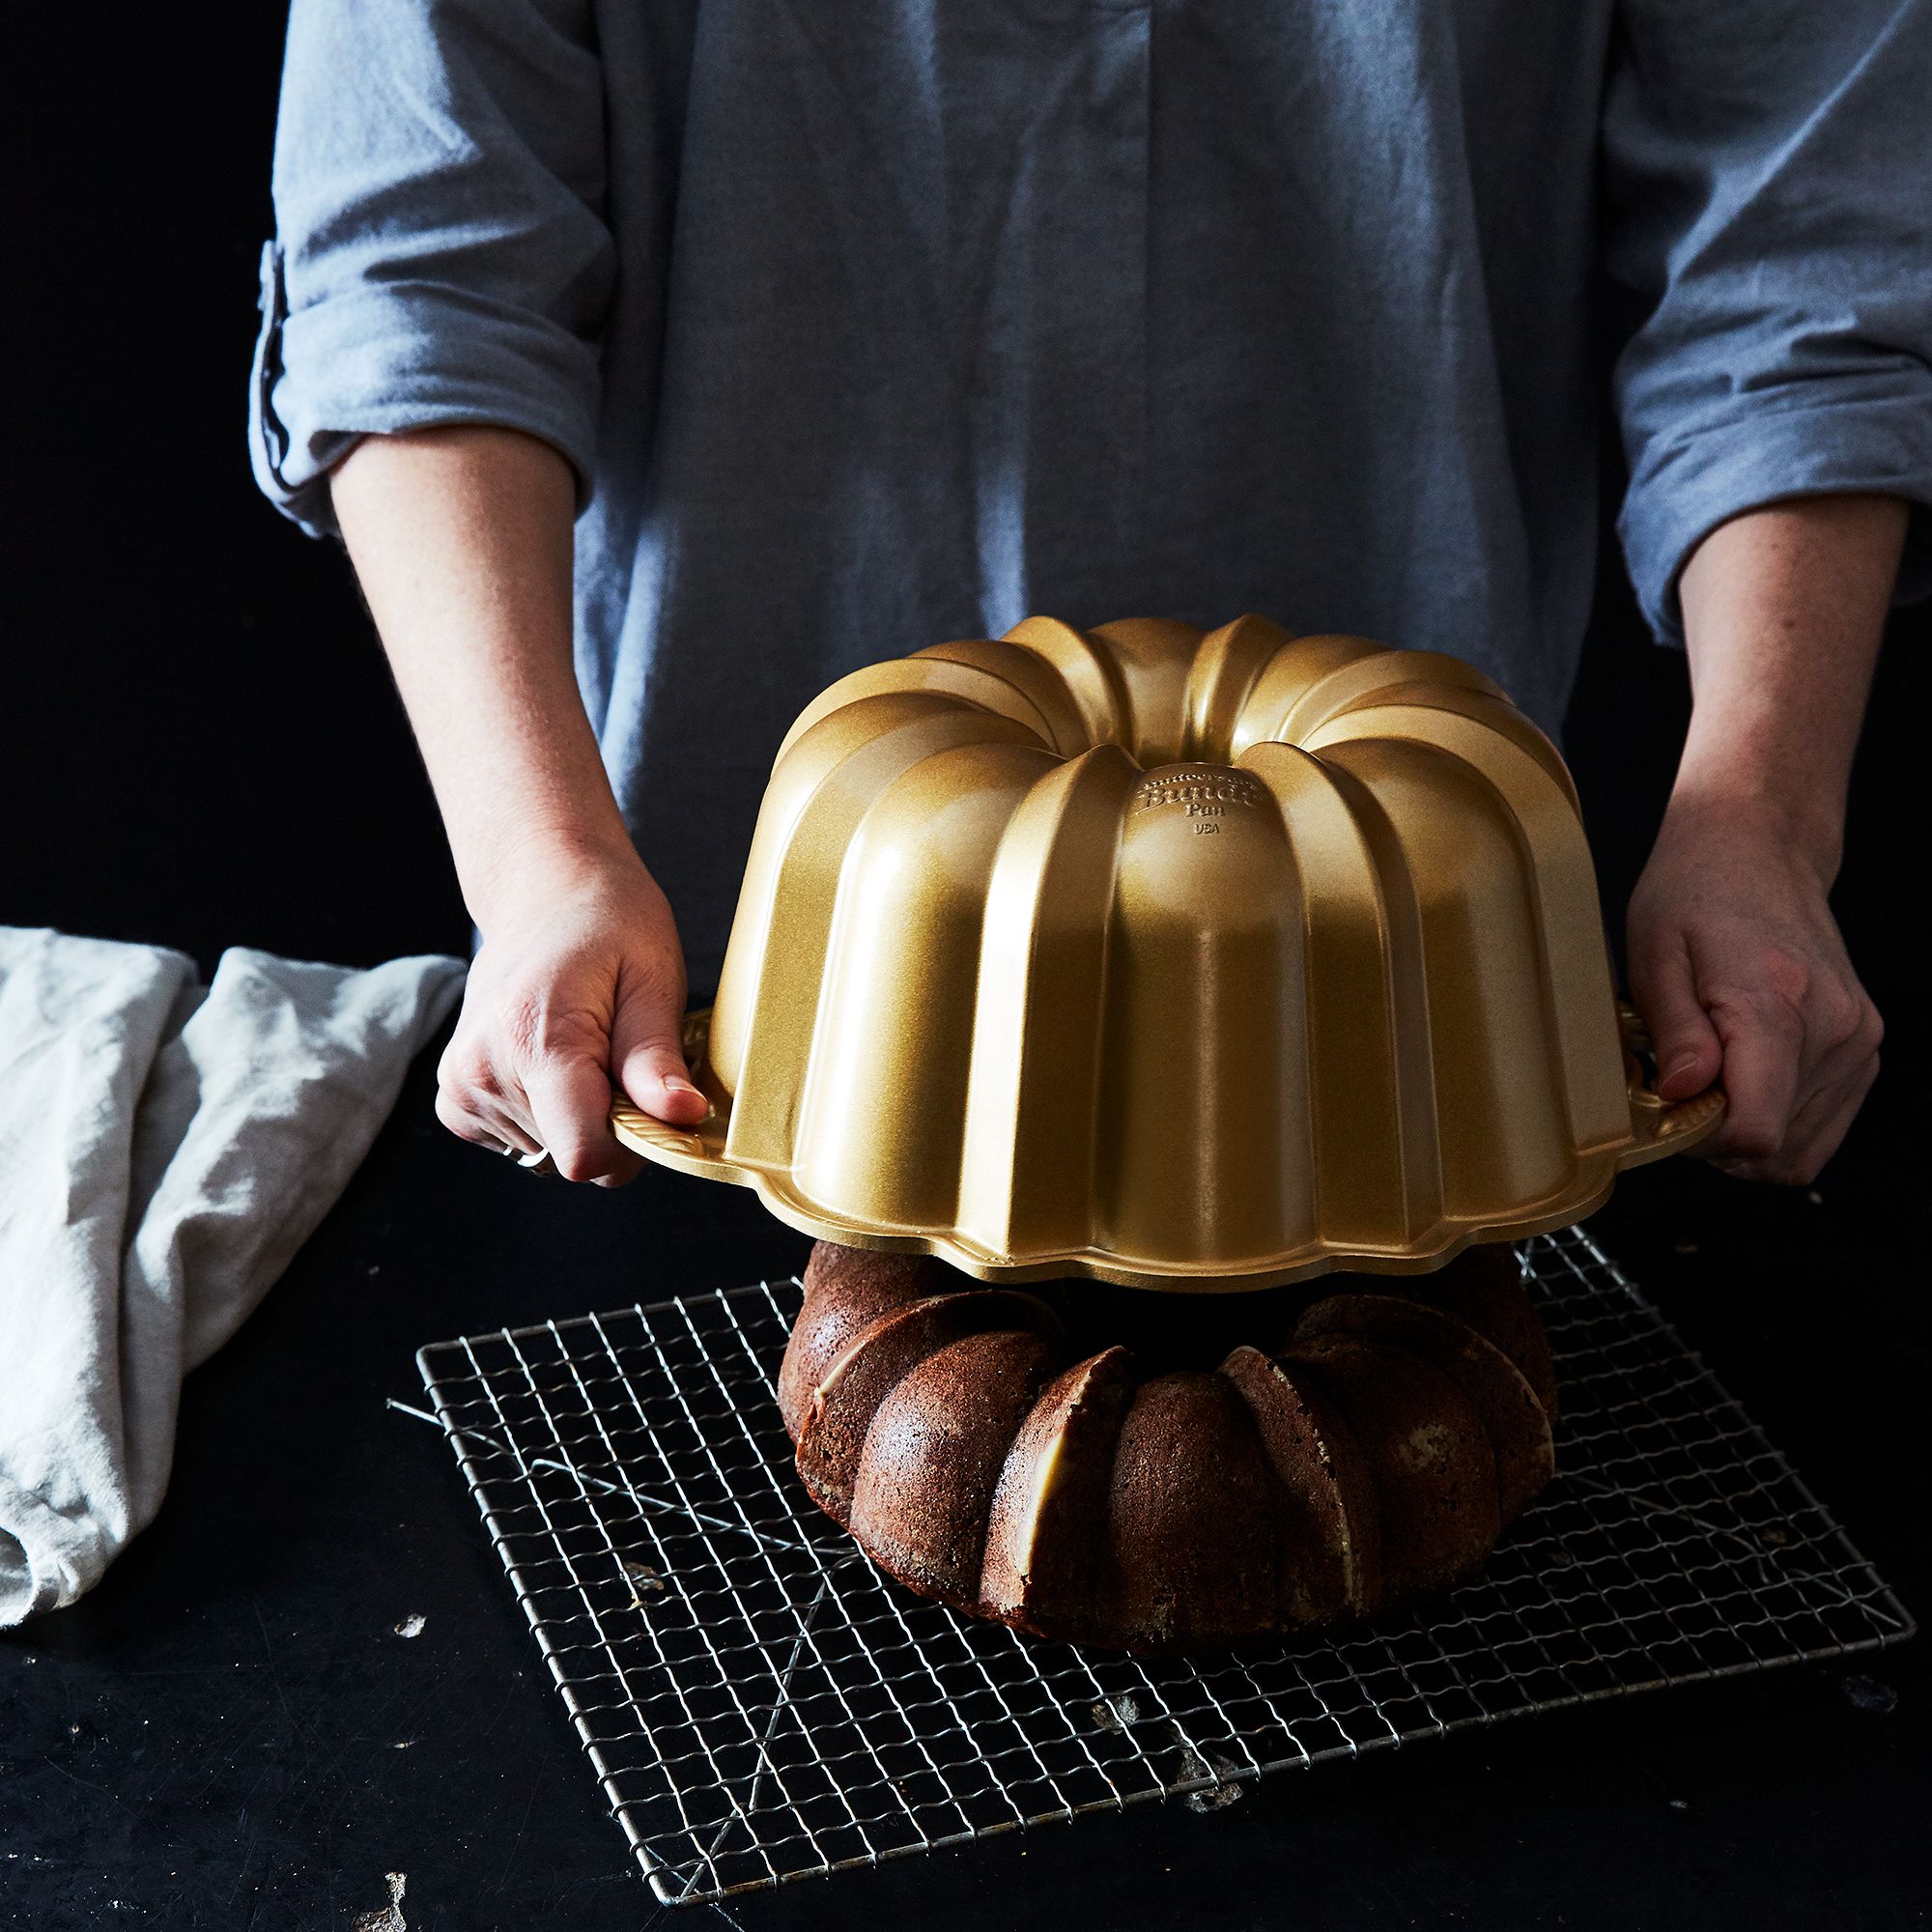 Nordic Ware Bundt Pan in Silver or Gold, 12-Cup & 6-Cup Sizes on